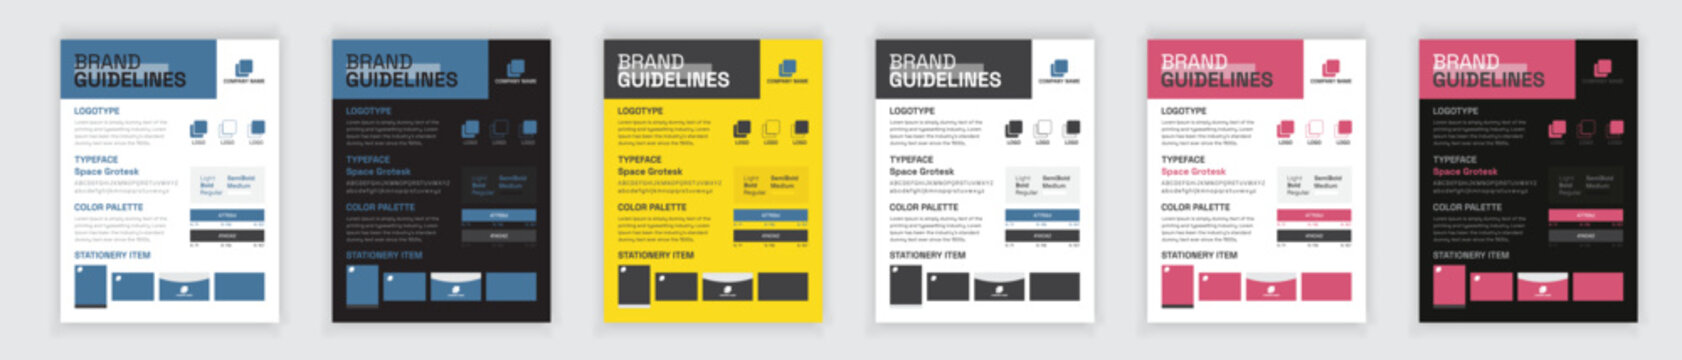 Brand Manual Templates, DIN A3 Brand Guidelines Poster Layout Set, Brand Guidelines